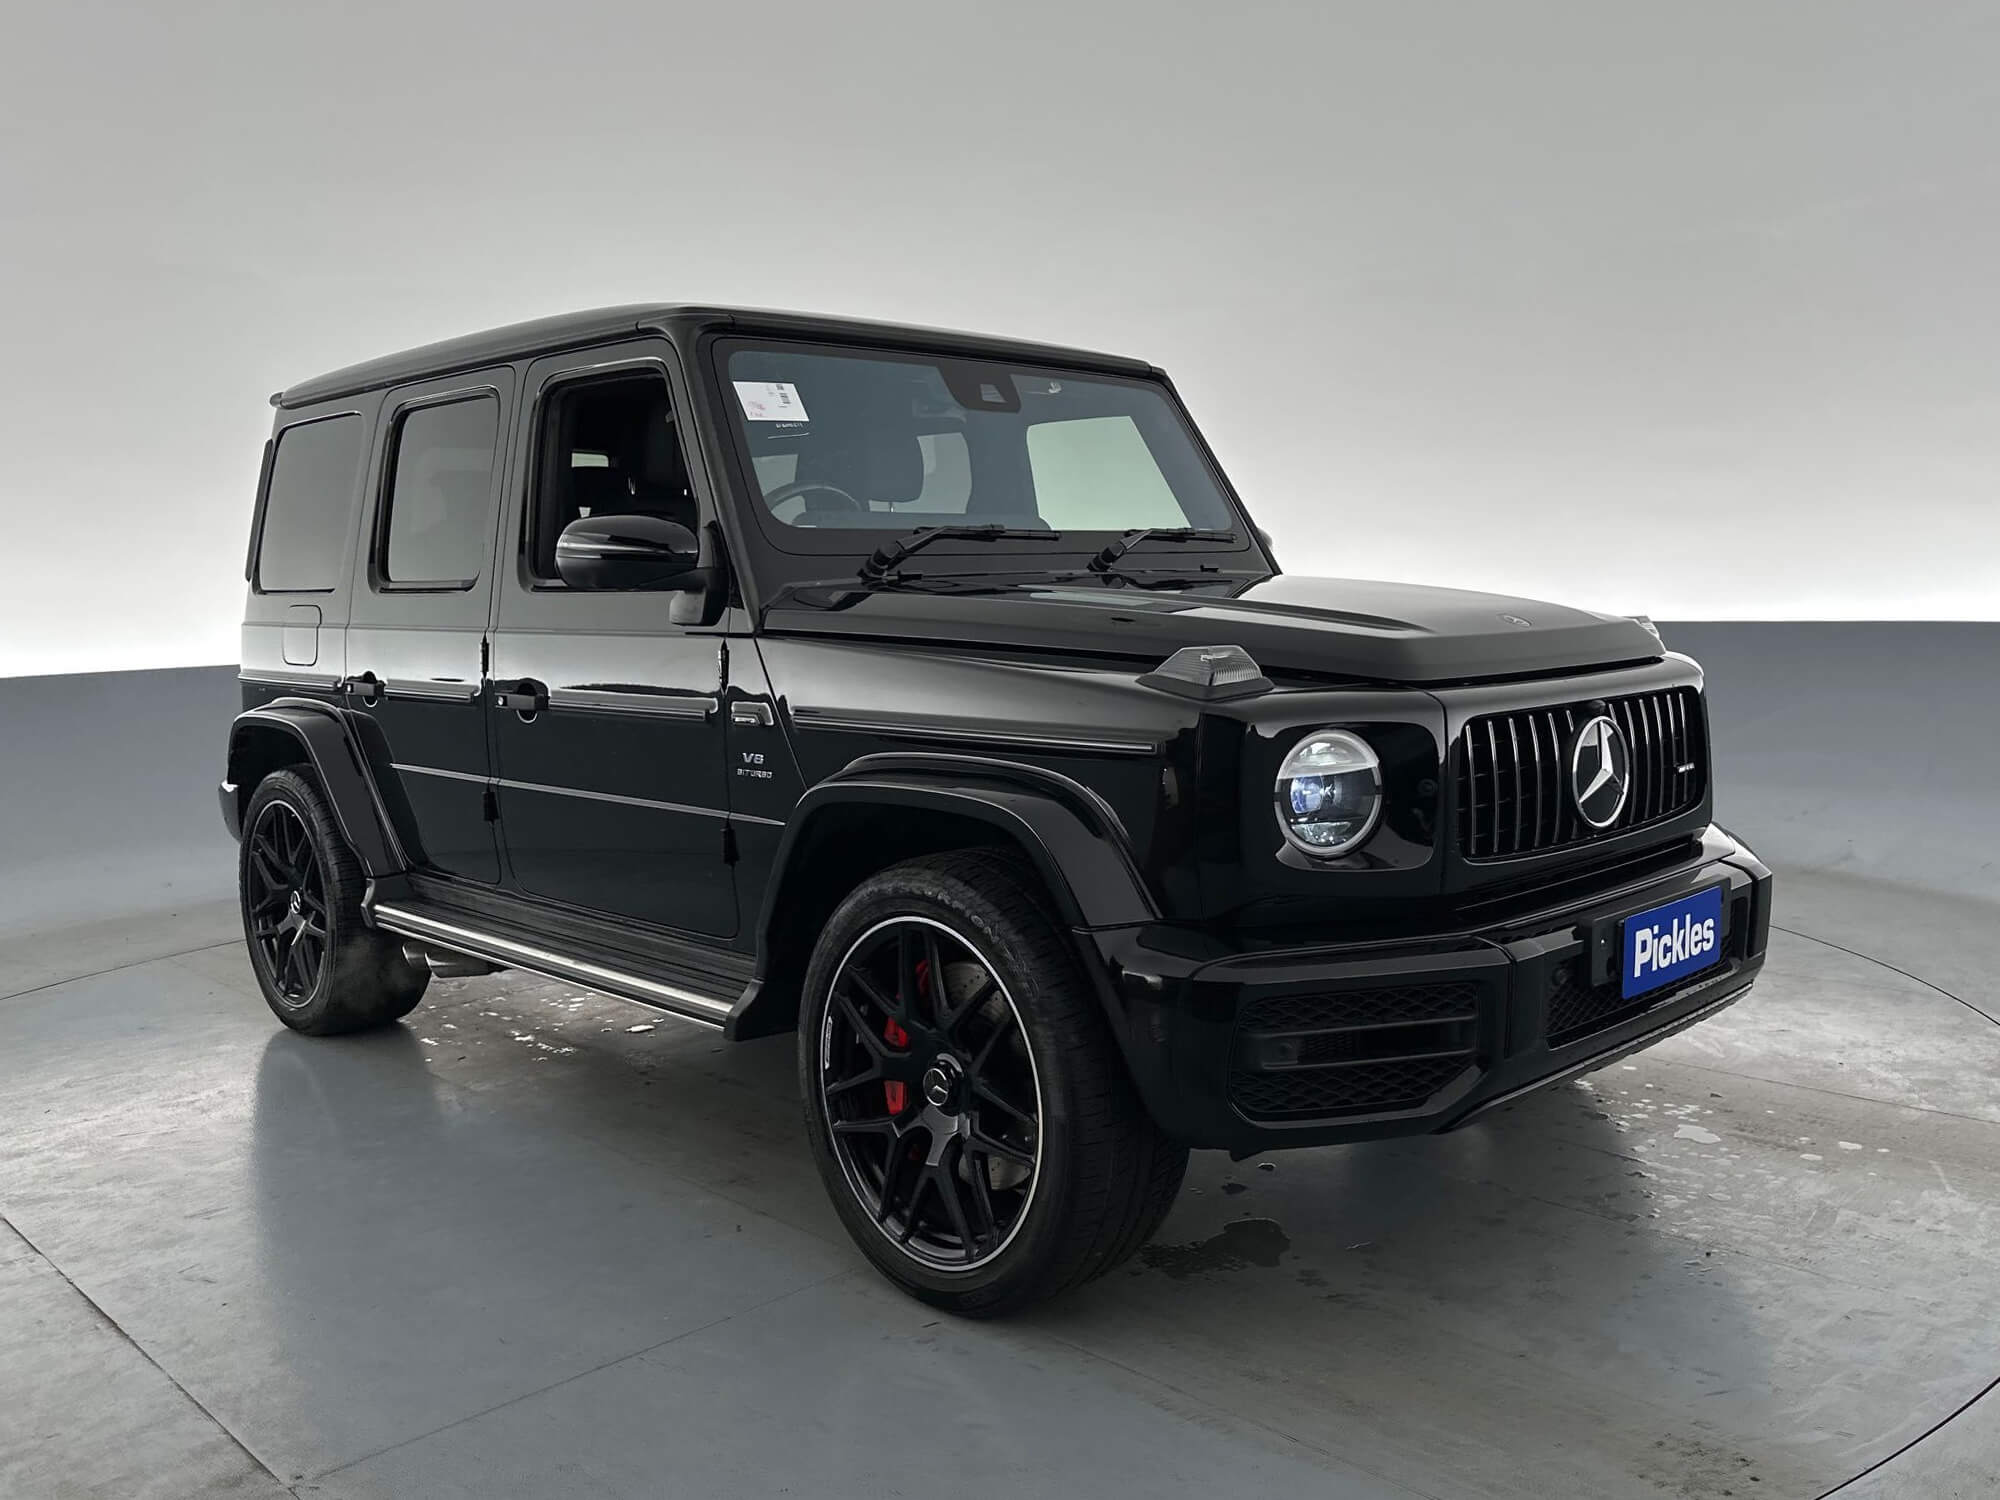 View a black 2020 Mercedes-Benz G-Class G63 AMG available via auction.